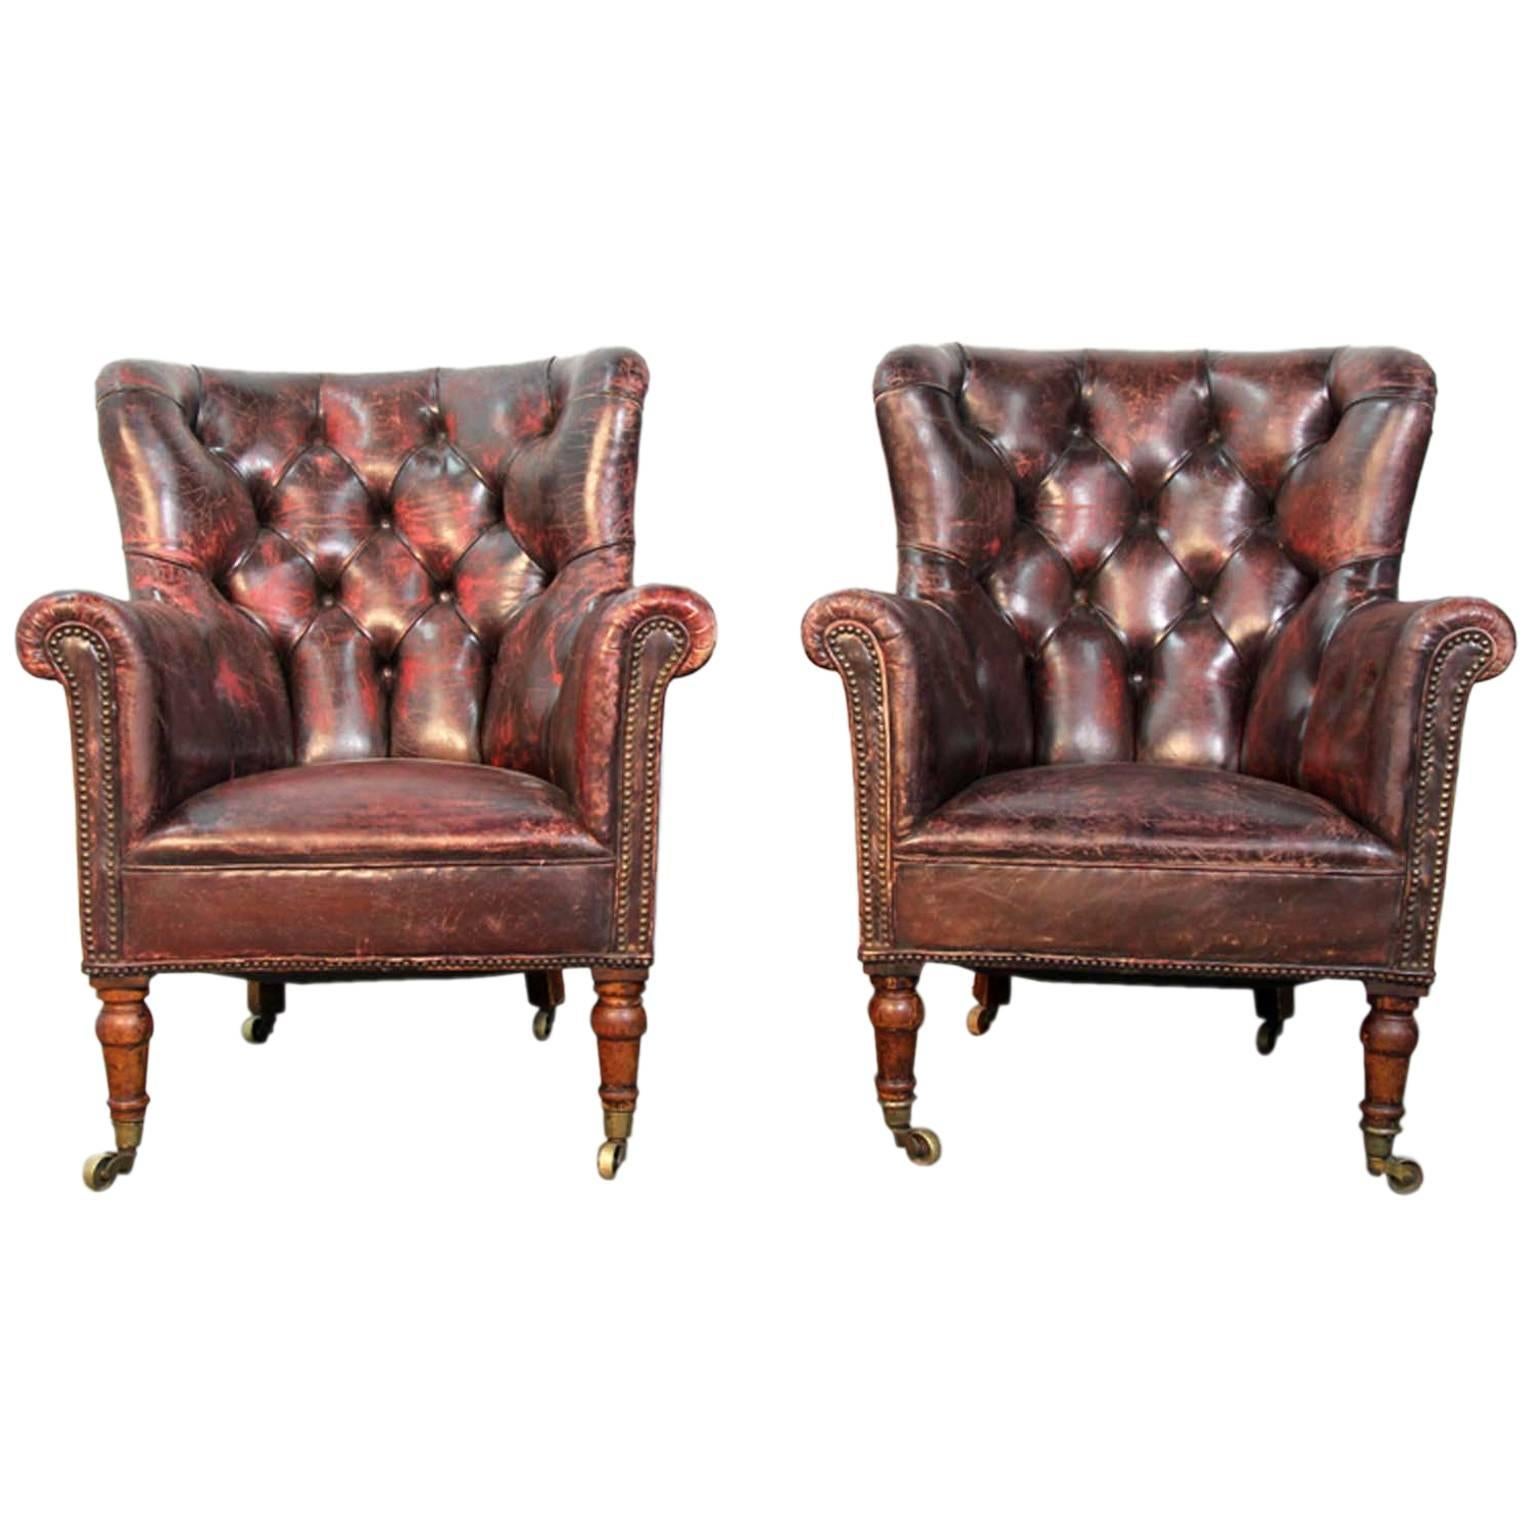 19th Century Pair of Tufted Leather Club Library Chairs